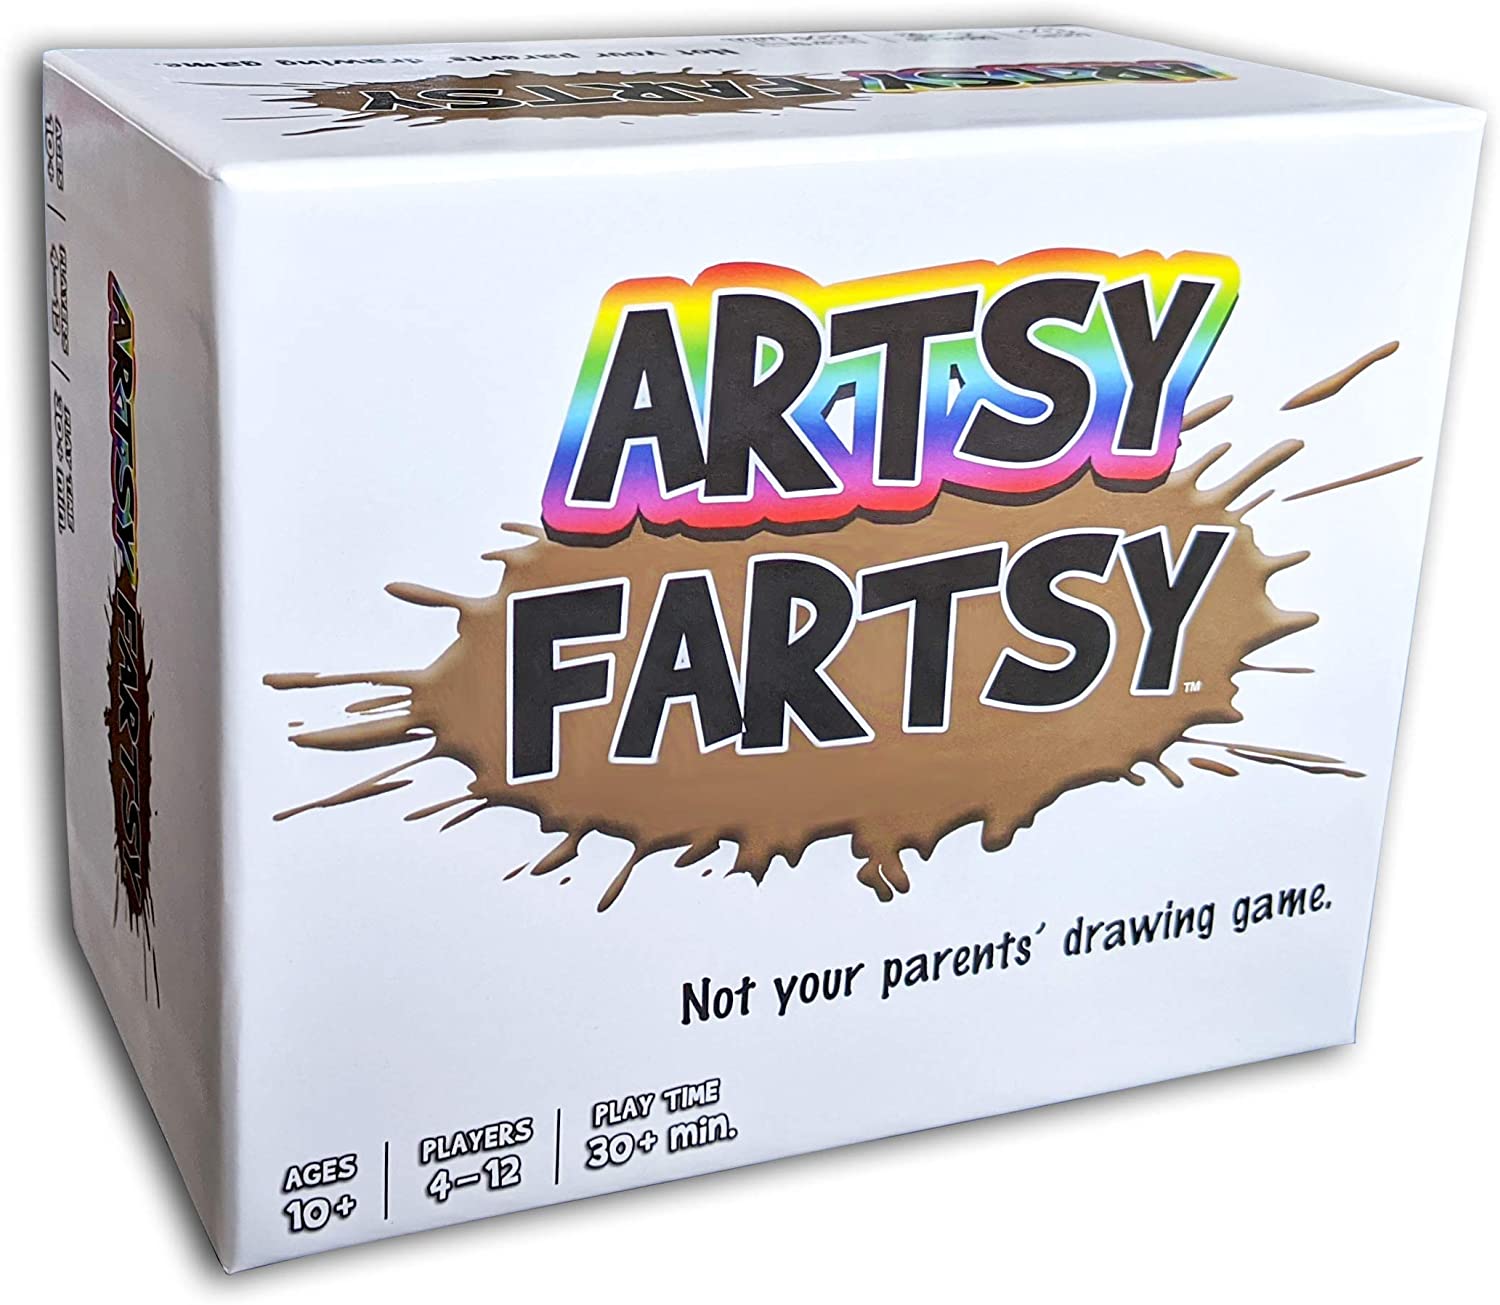 Artsy Fartsy - Not Your Parents' Drawing Game